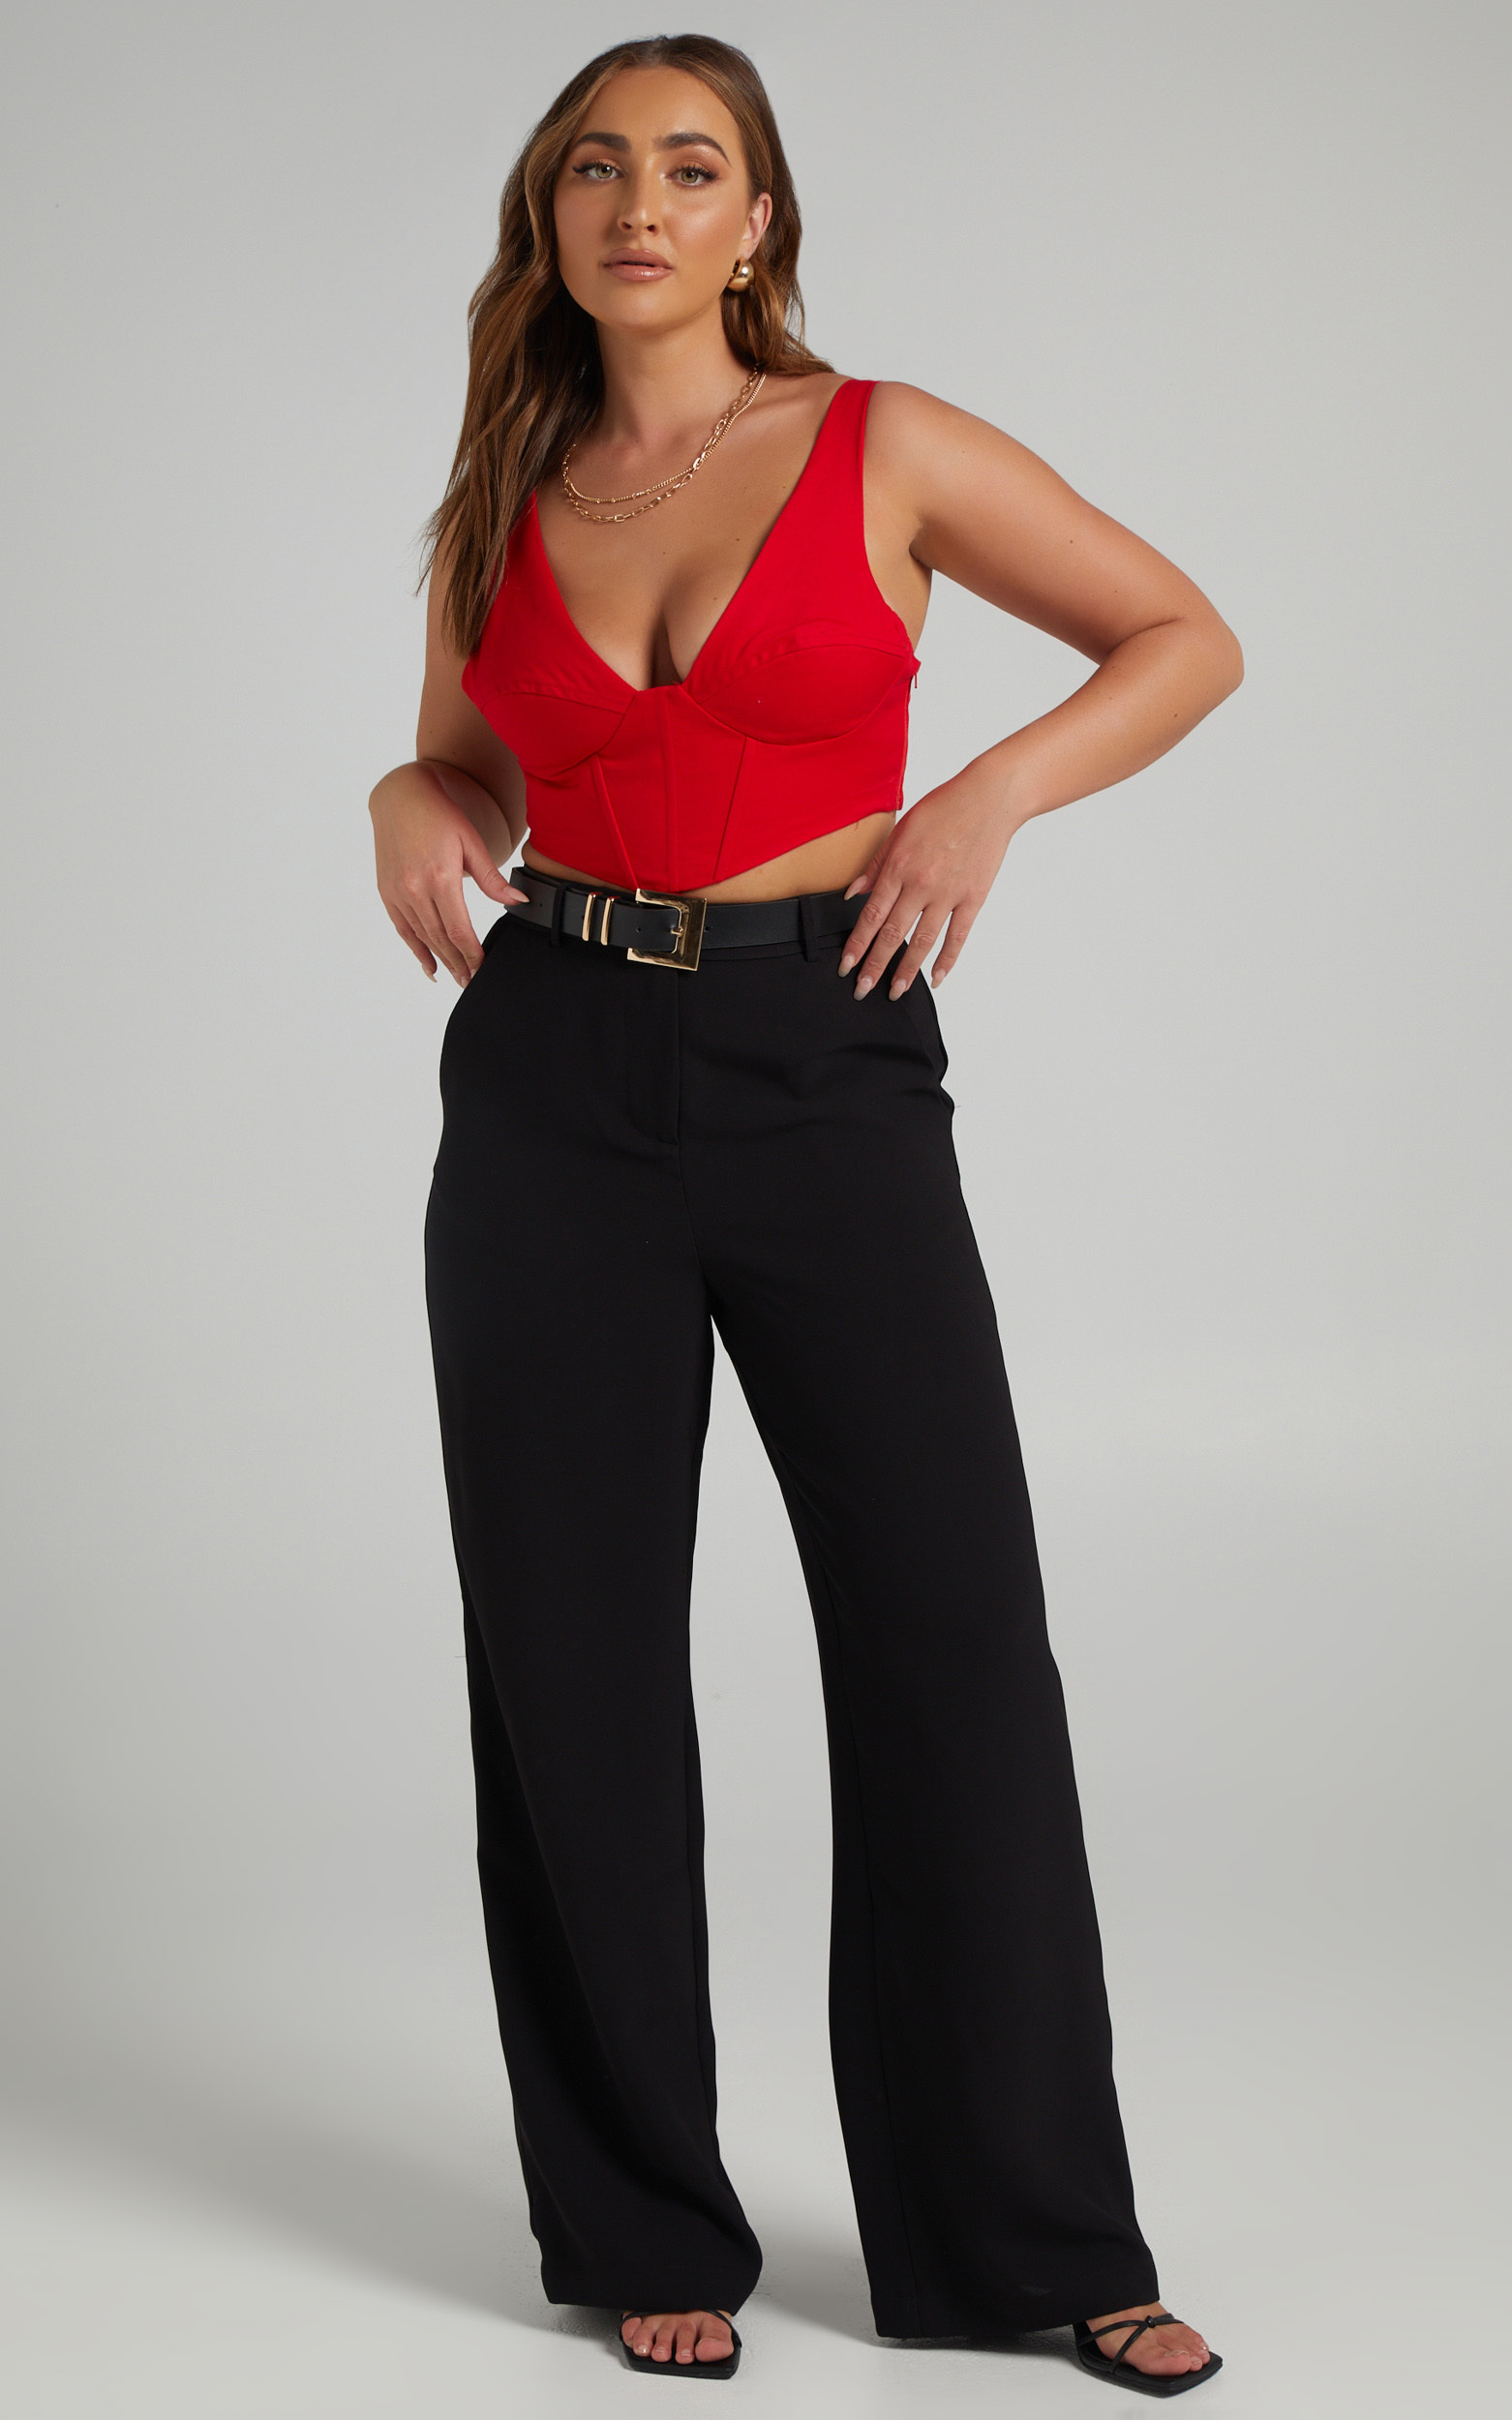 Ohganda V Neck Corset Top in Red - 06, RED1, hi-res image number null